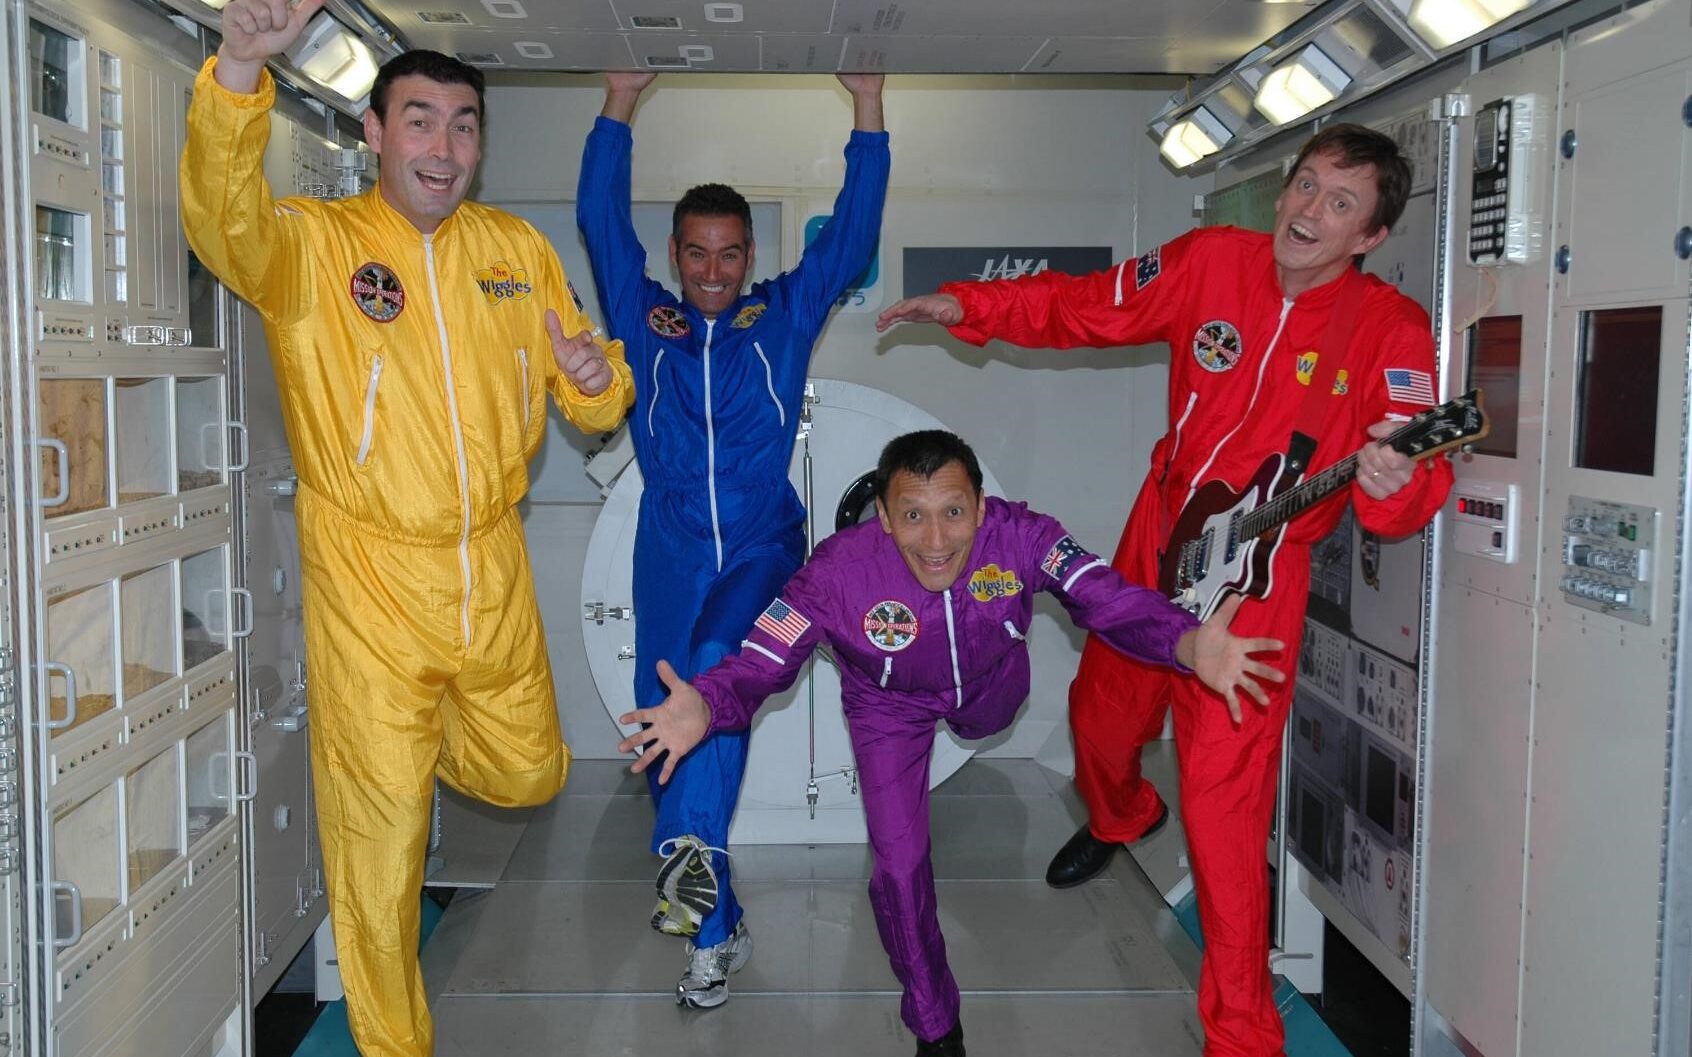 Hot Potato: The Story of The Wiggles on Prime Video